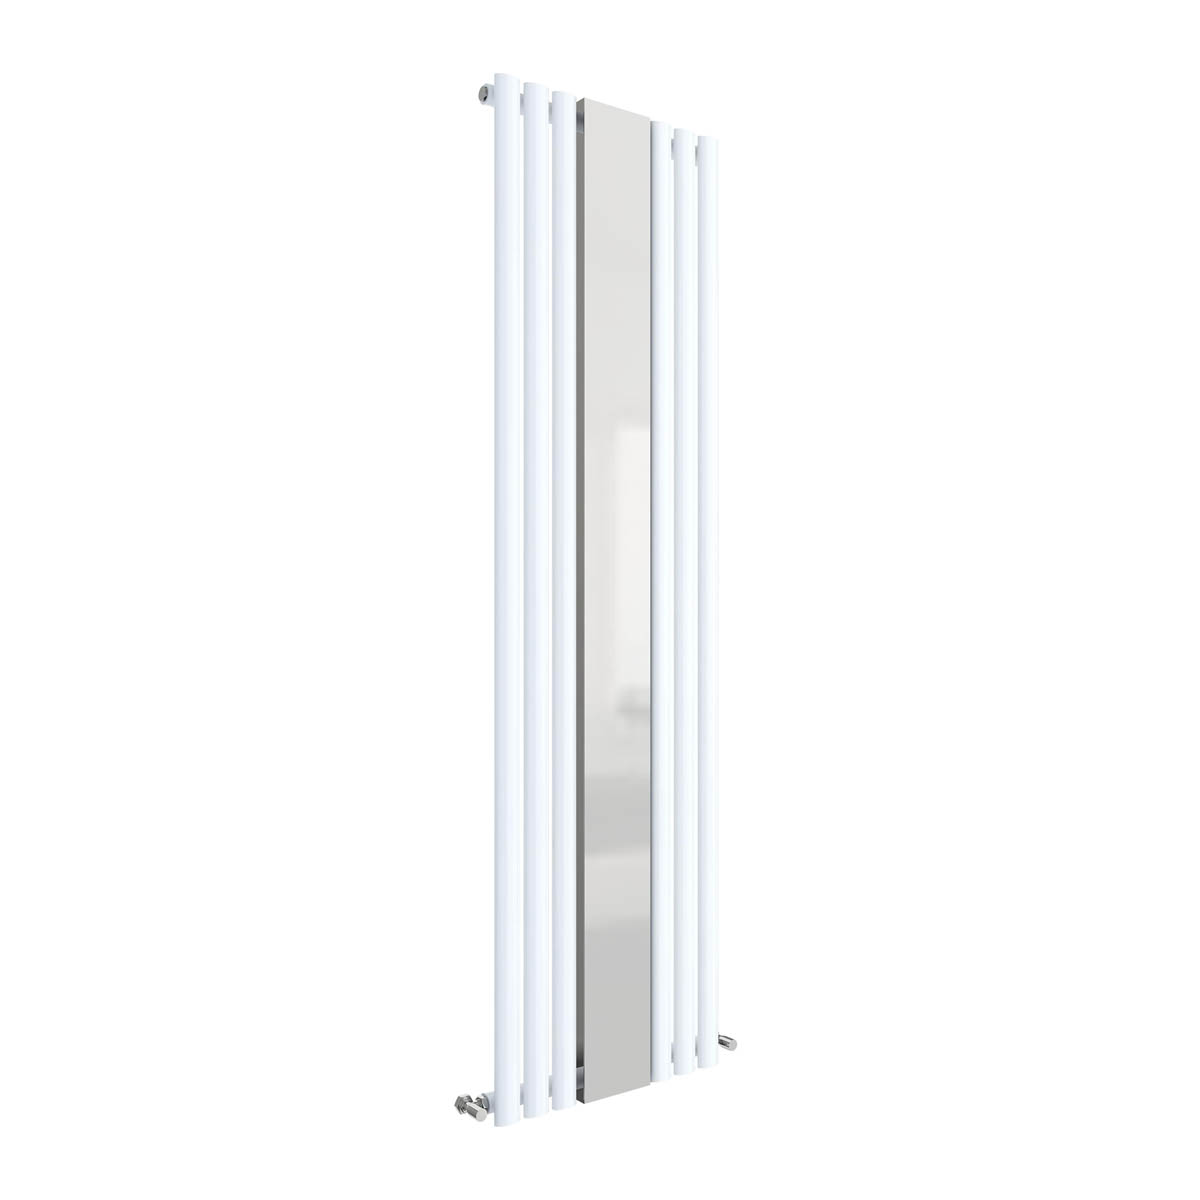 Hudson Reed Revive 1800 x 499mm Single Panel Radiator with Mirror - White HL330 (15893)